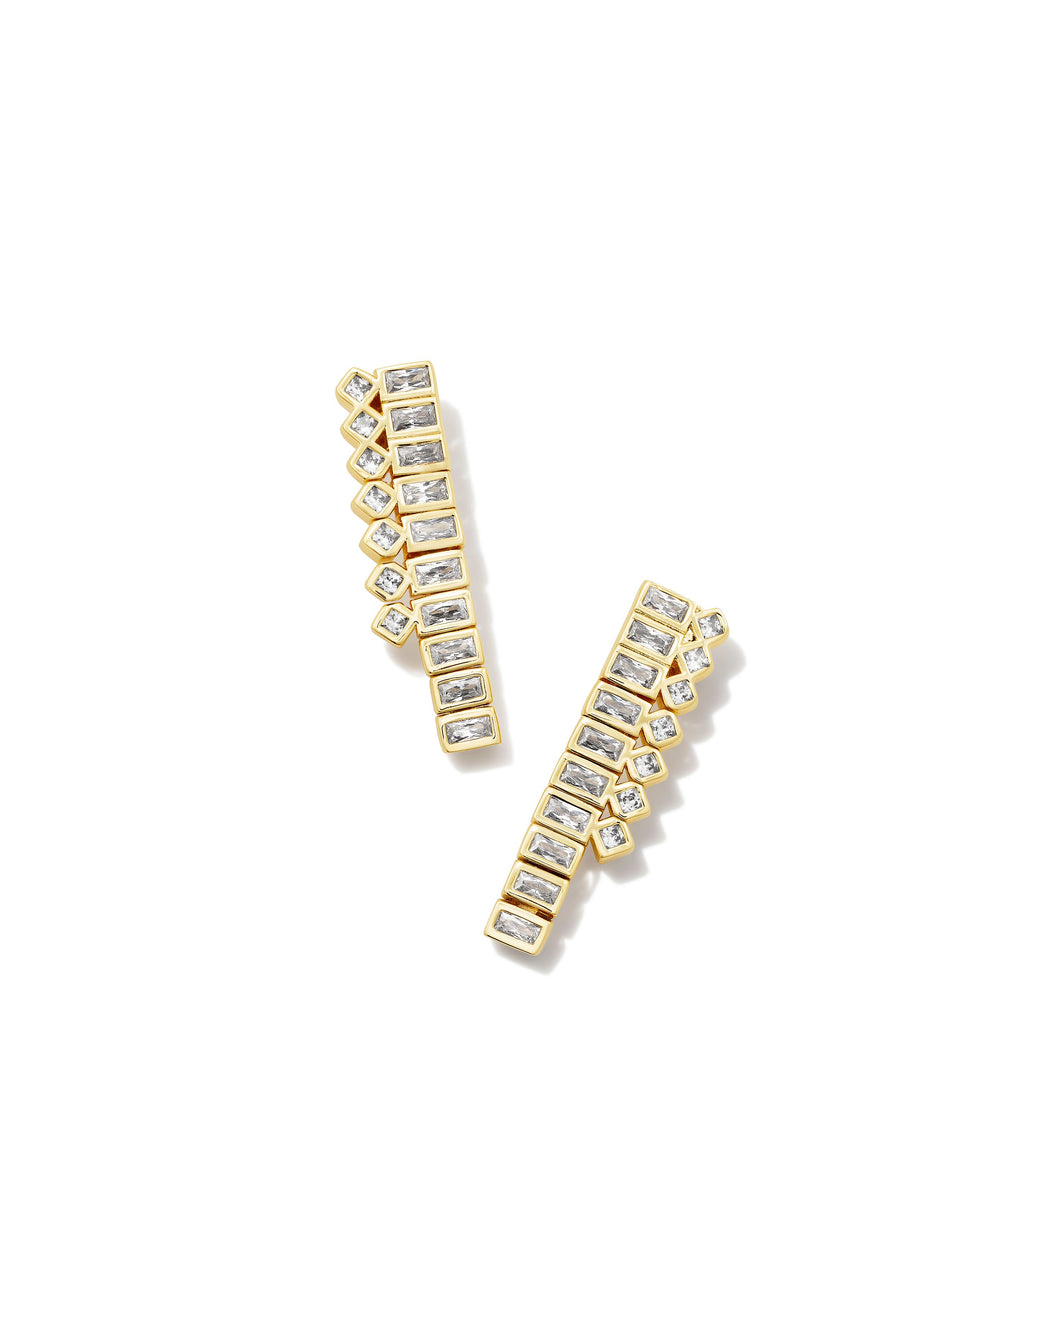 Gracie Gold Tennis Linear Earrings in White Crystal